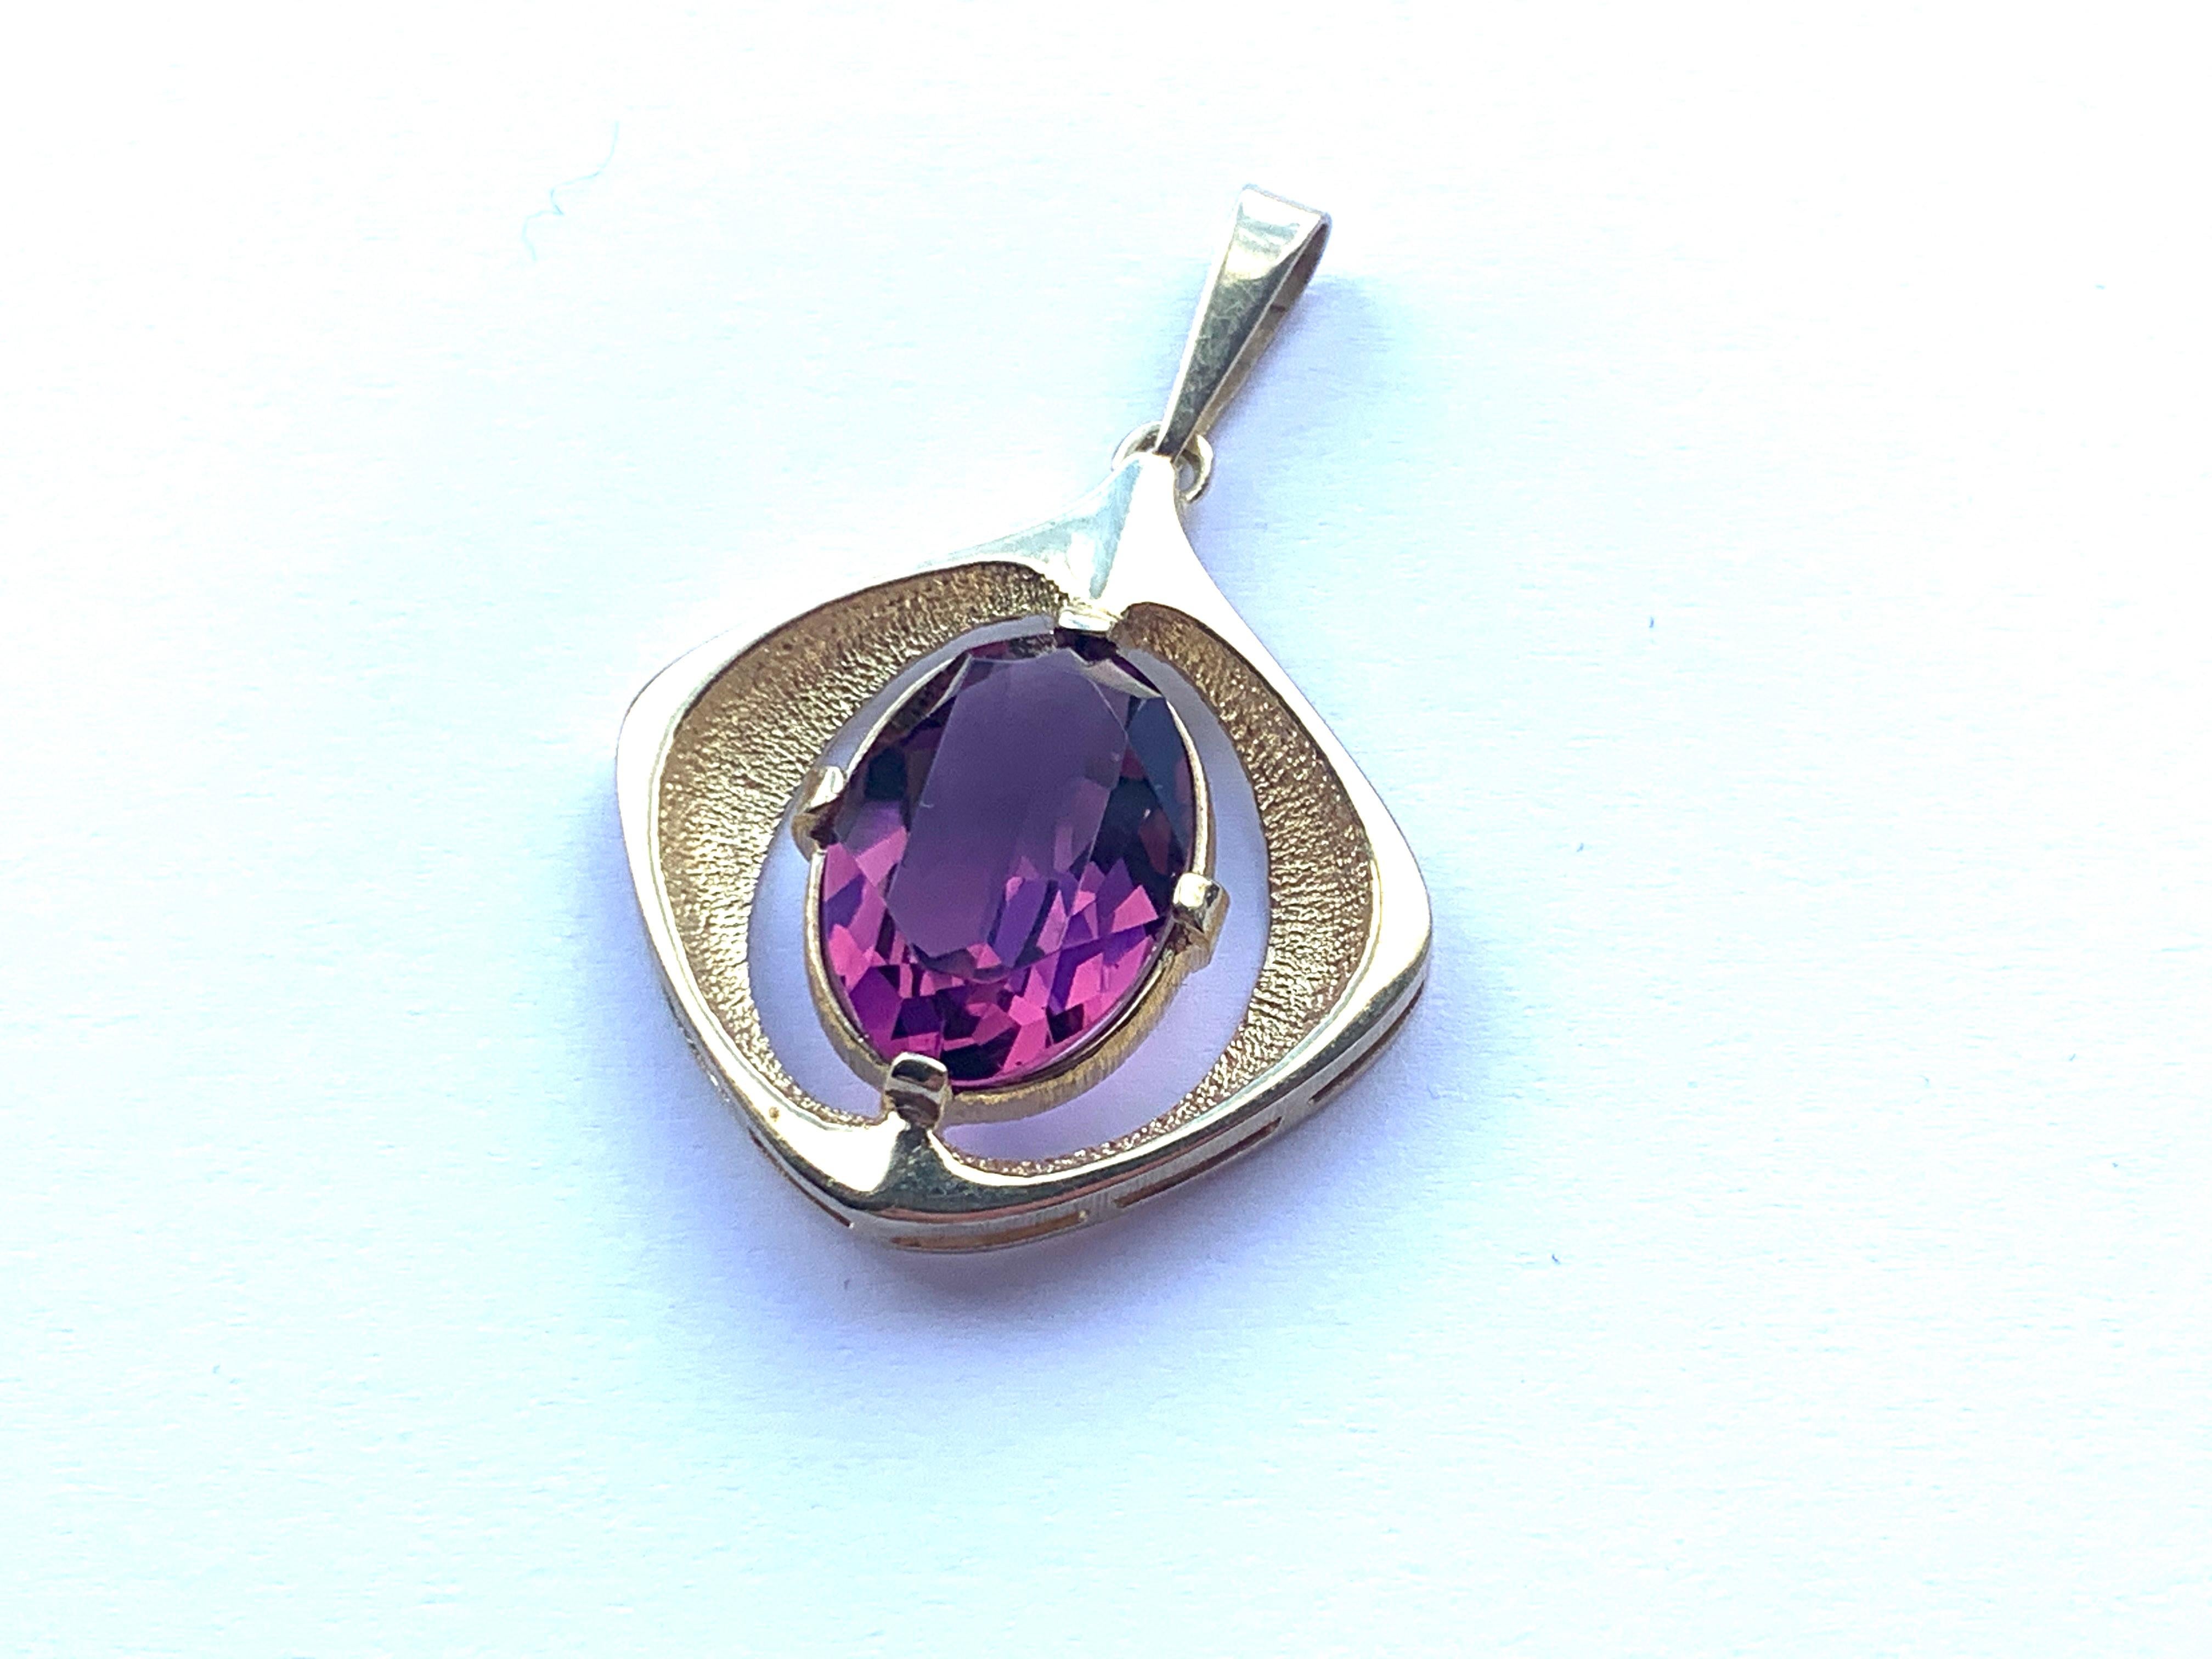 Contemporary modernist 
9ct Gold Amethyst Pendant
Stone : 8.75ct Oval Amethyst Gem 
By Danish Designer Hermann Siersbol
Exquisite Contemporary Design
Fully Hallmarked (British - import) with Letters H.S
Weight 5.5 grammes
In excellent